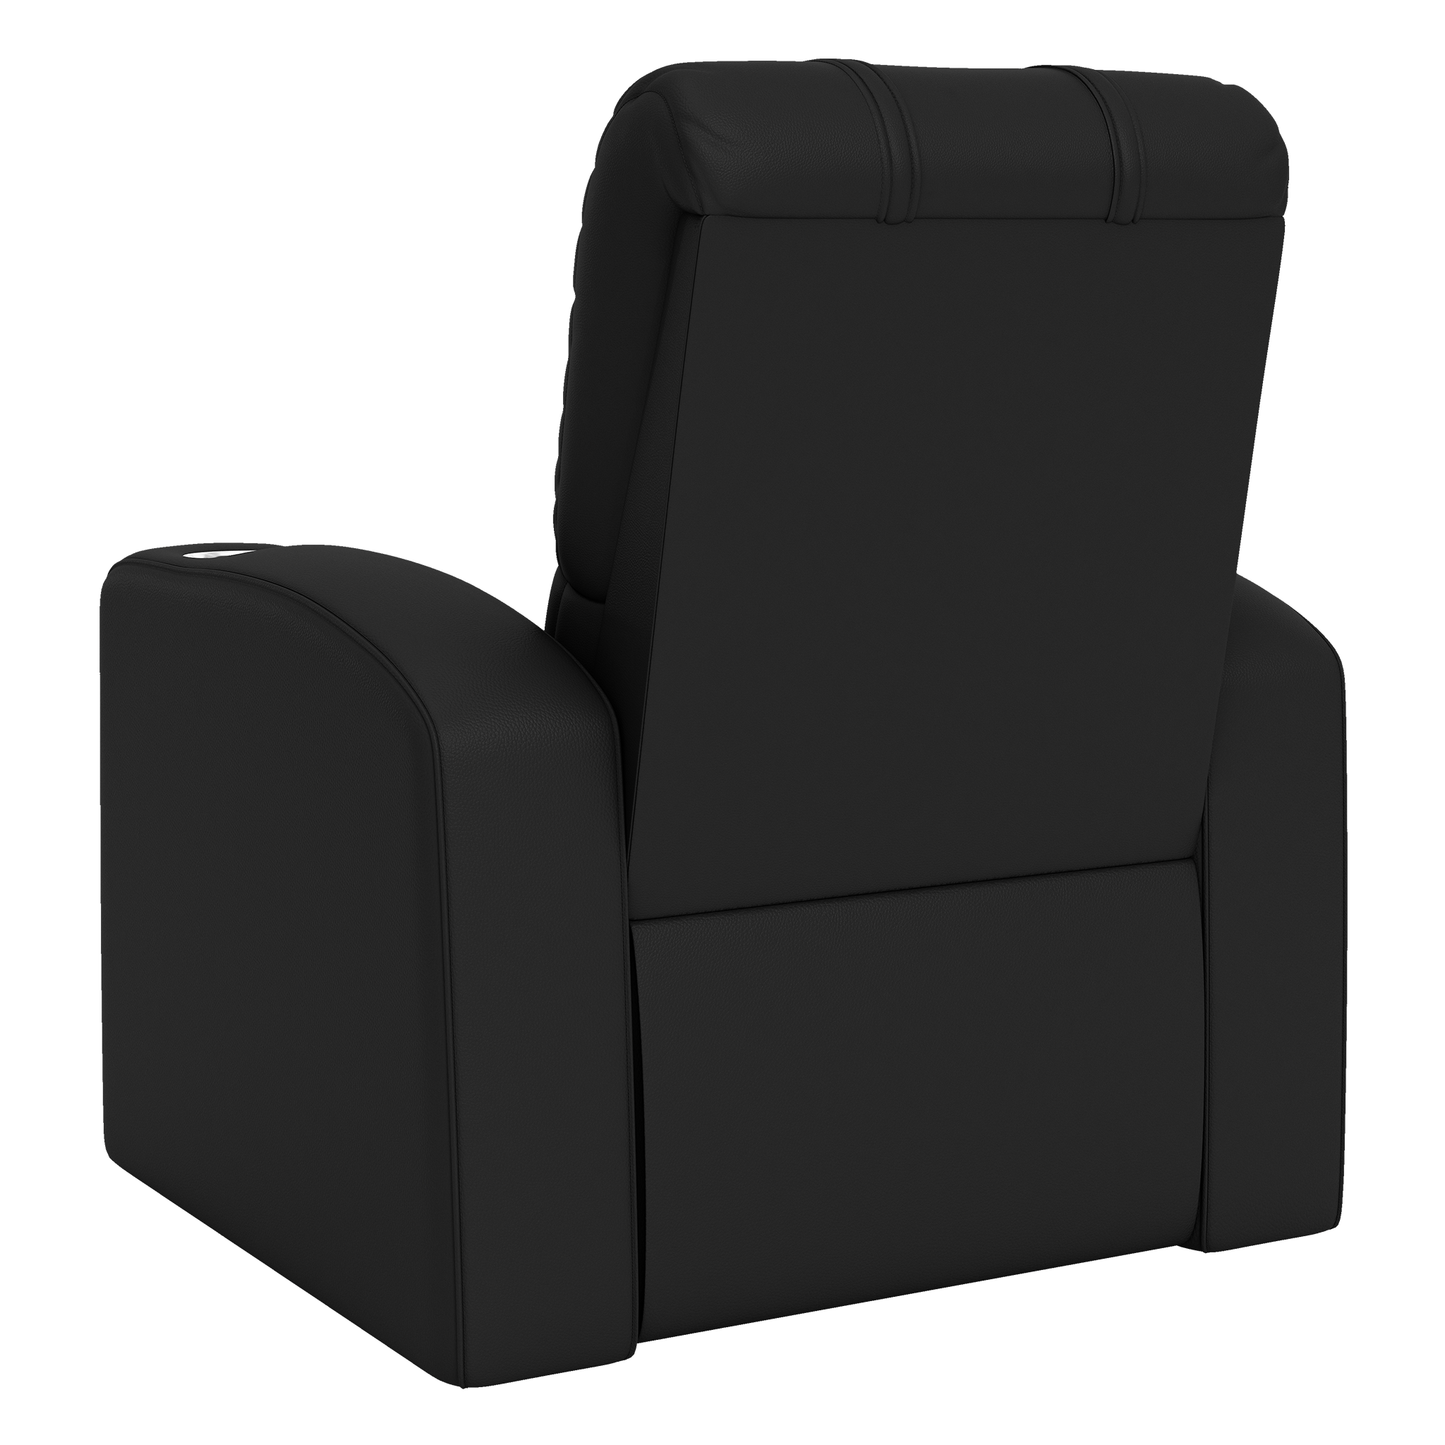 Relax Home Theater Recliner with Notre Dame Primary Logo